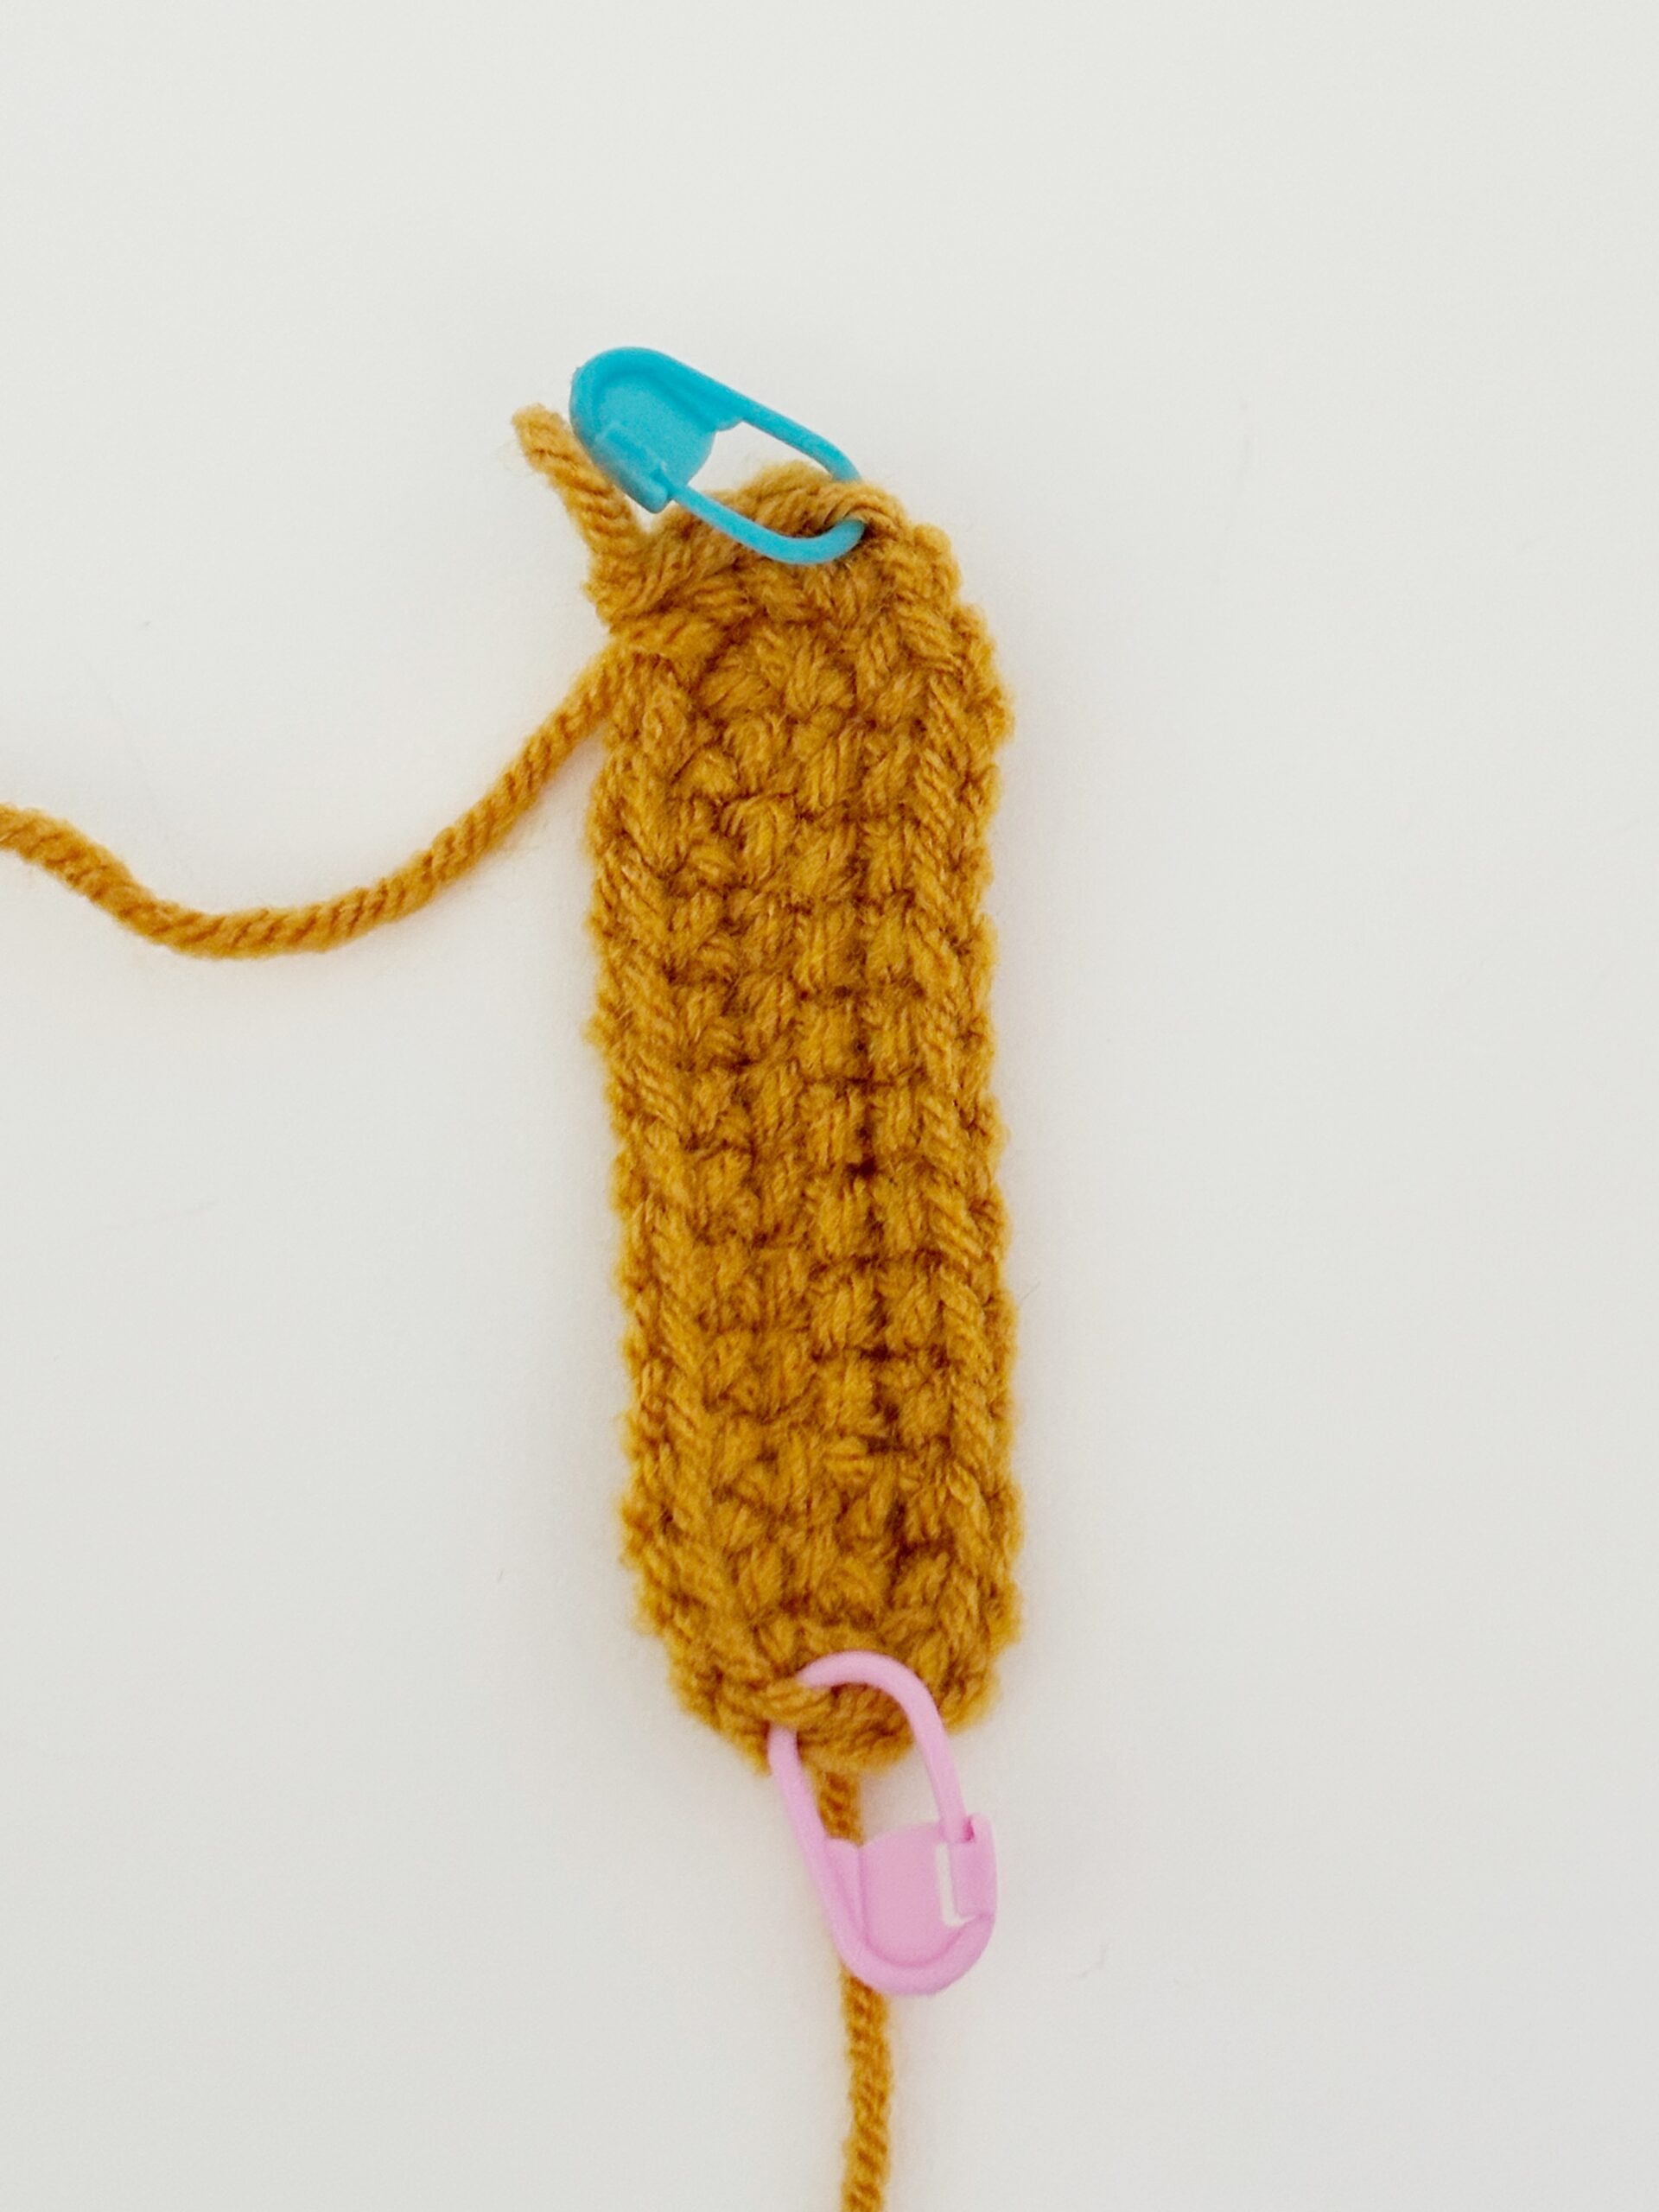 Working in an Oval Shape on the Other Side of the Chain for Amigurumi Increasing